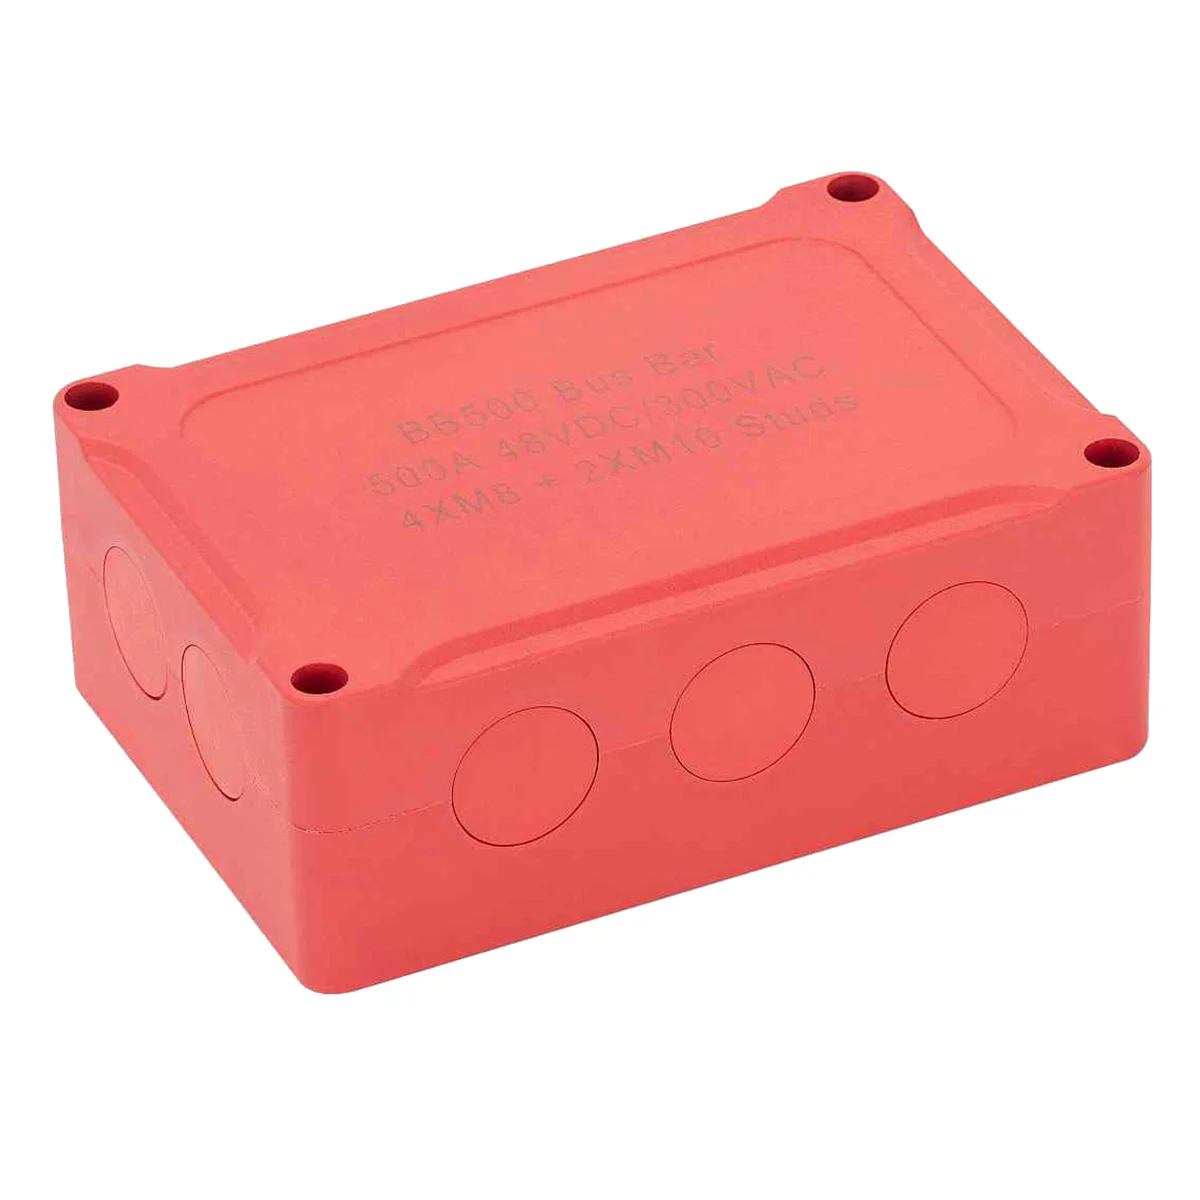 

500A Marine Bus Bar 48V Automotive Power Distribution Block Big Current 6 Studs Plastic Cover for Car Boat Auto Red